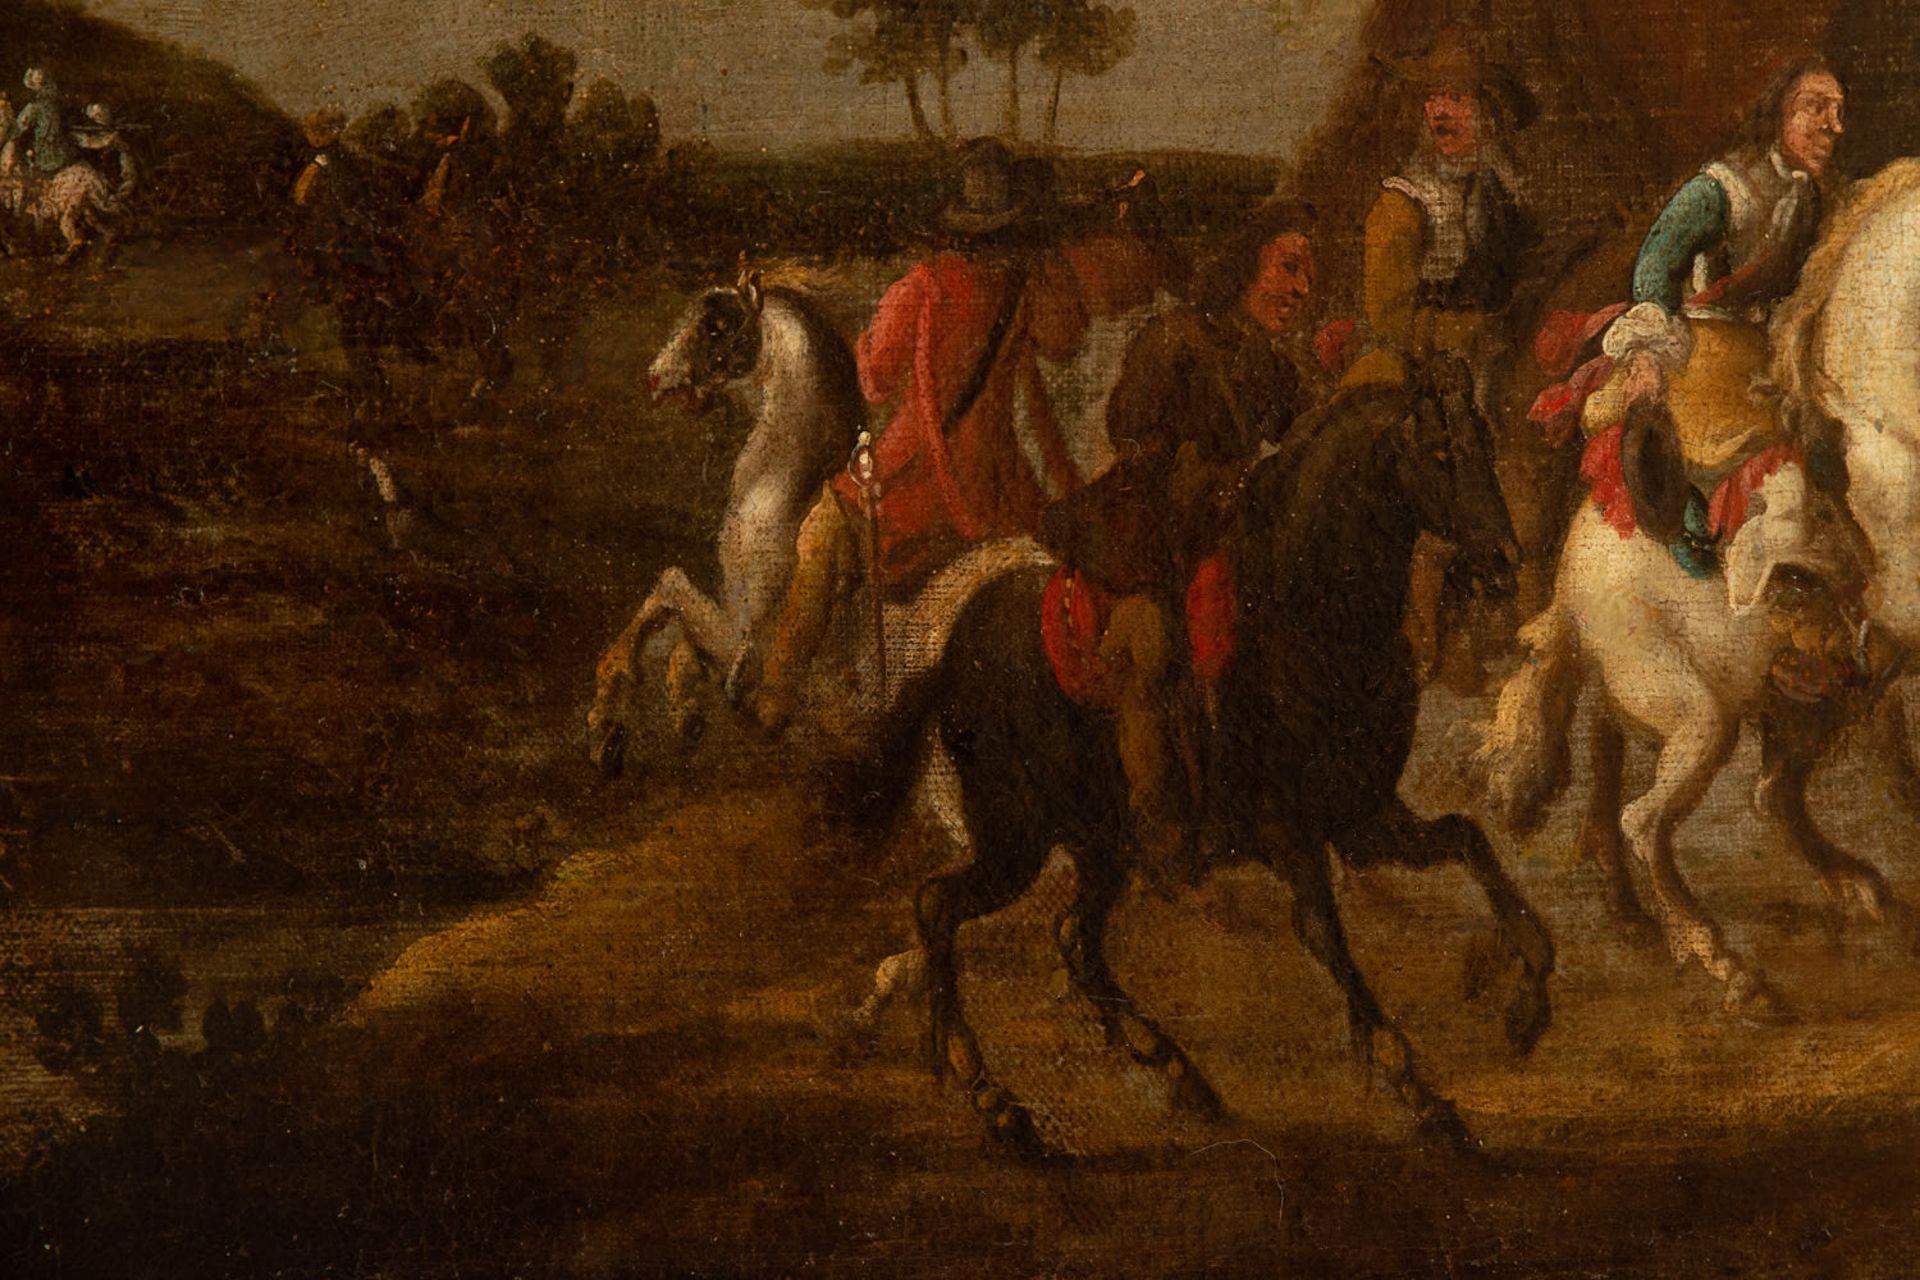 Cavalry scene, Dutch school from the second half of the 17th century - Image 10 of 12